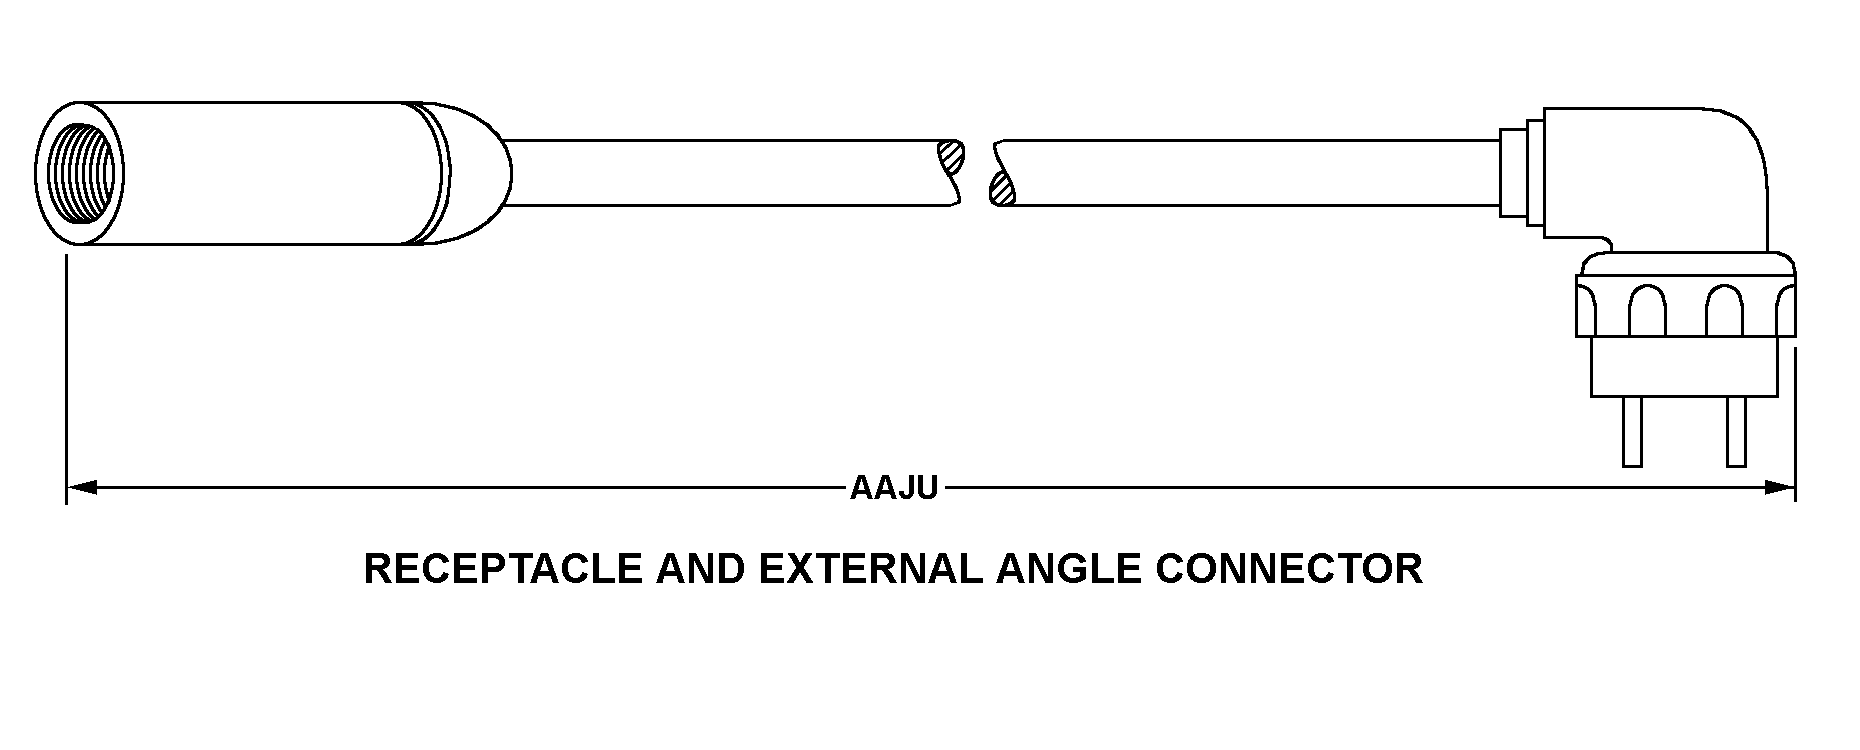 RECEPTACLE AND EXTERNAL ANGLE CONNECTOR style nsn 5995-01-045-3080